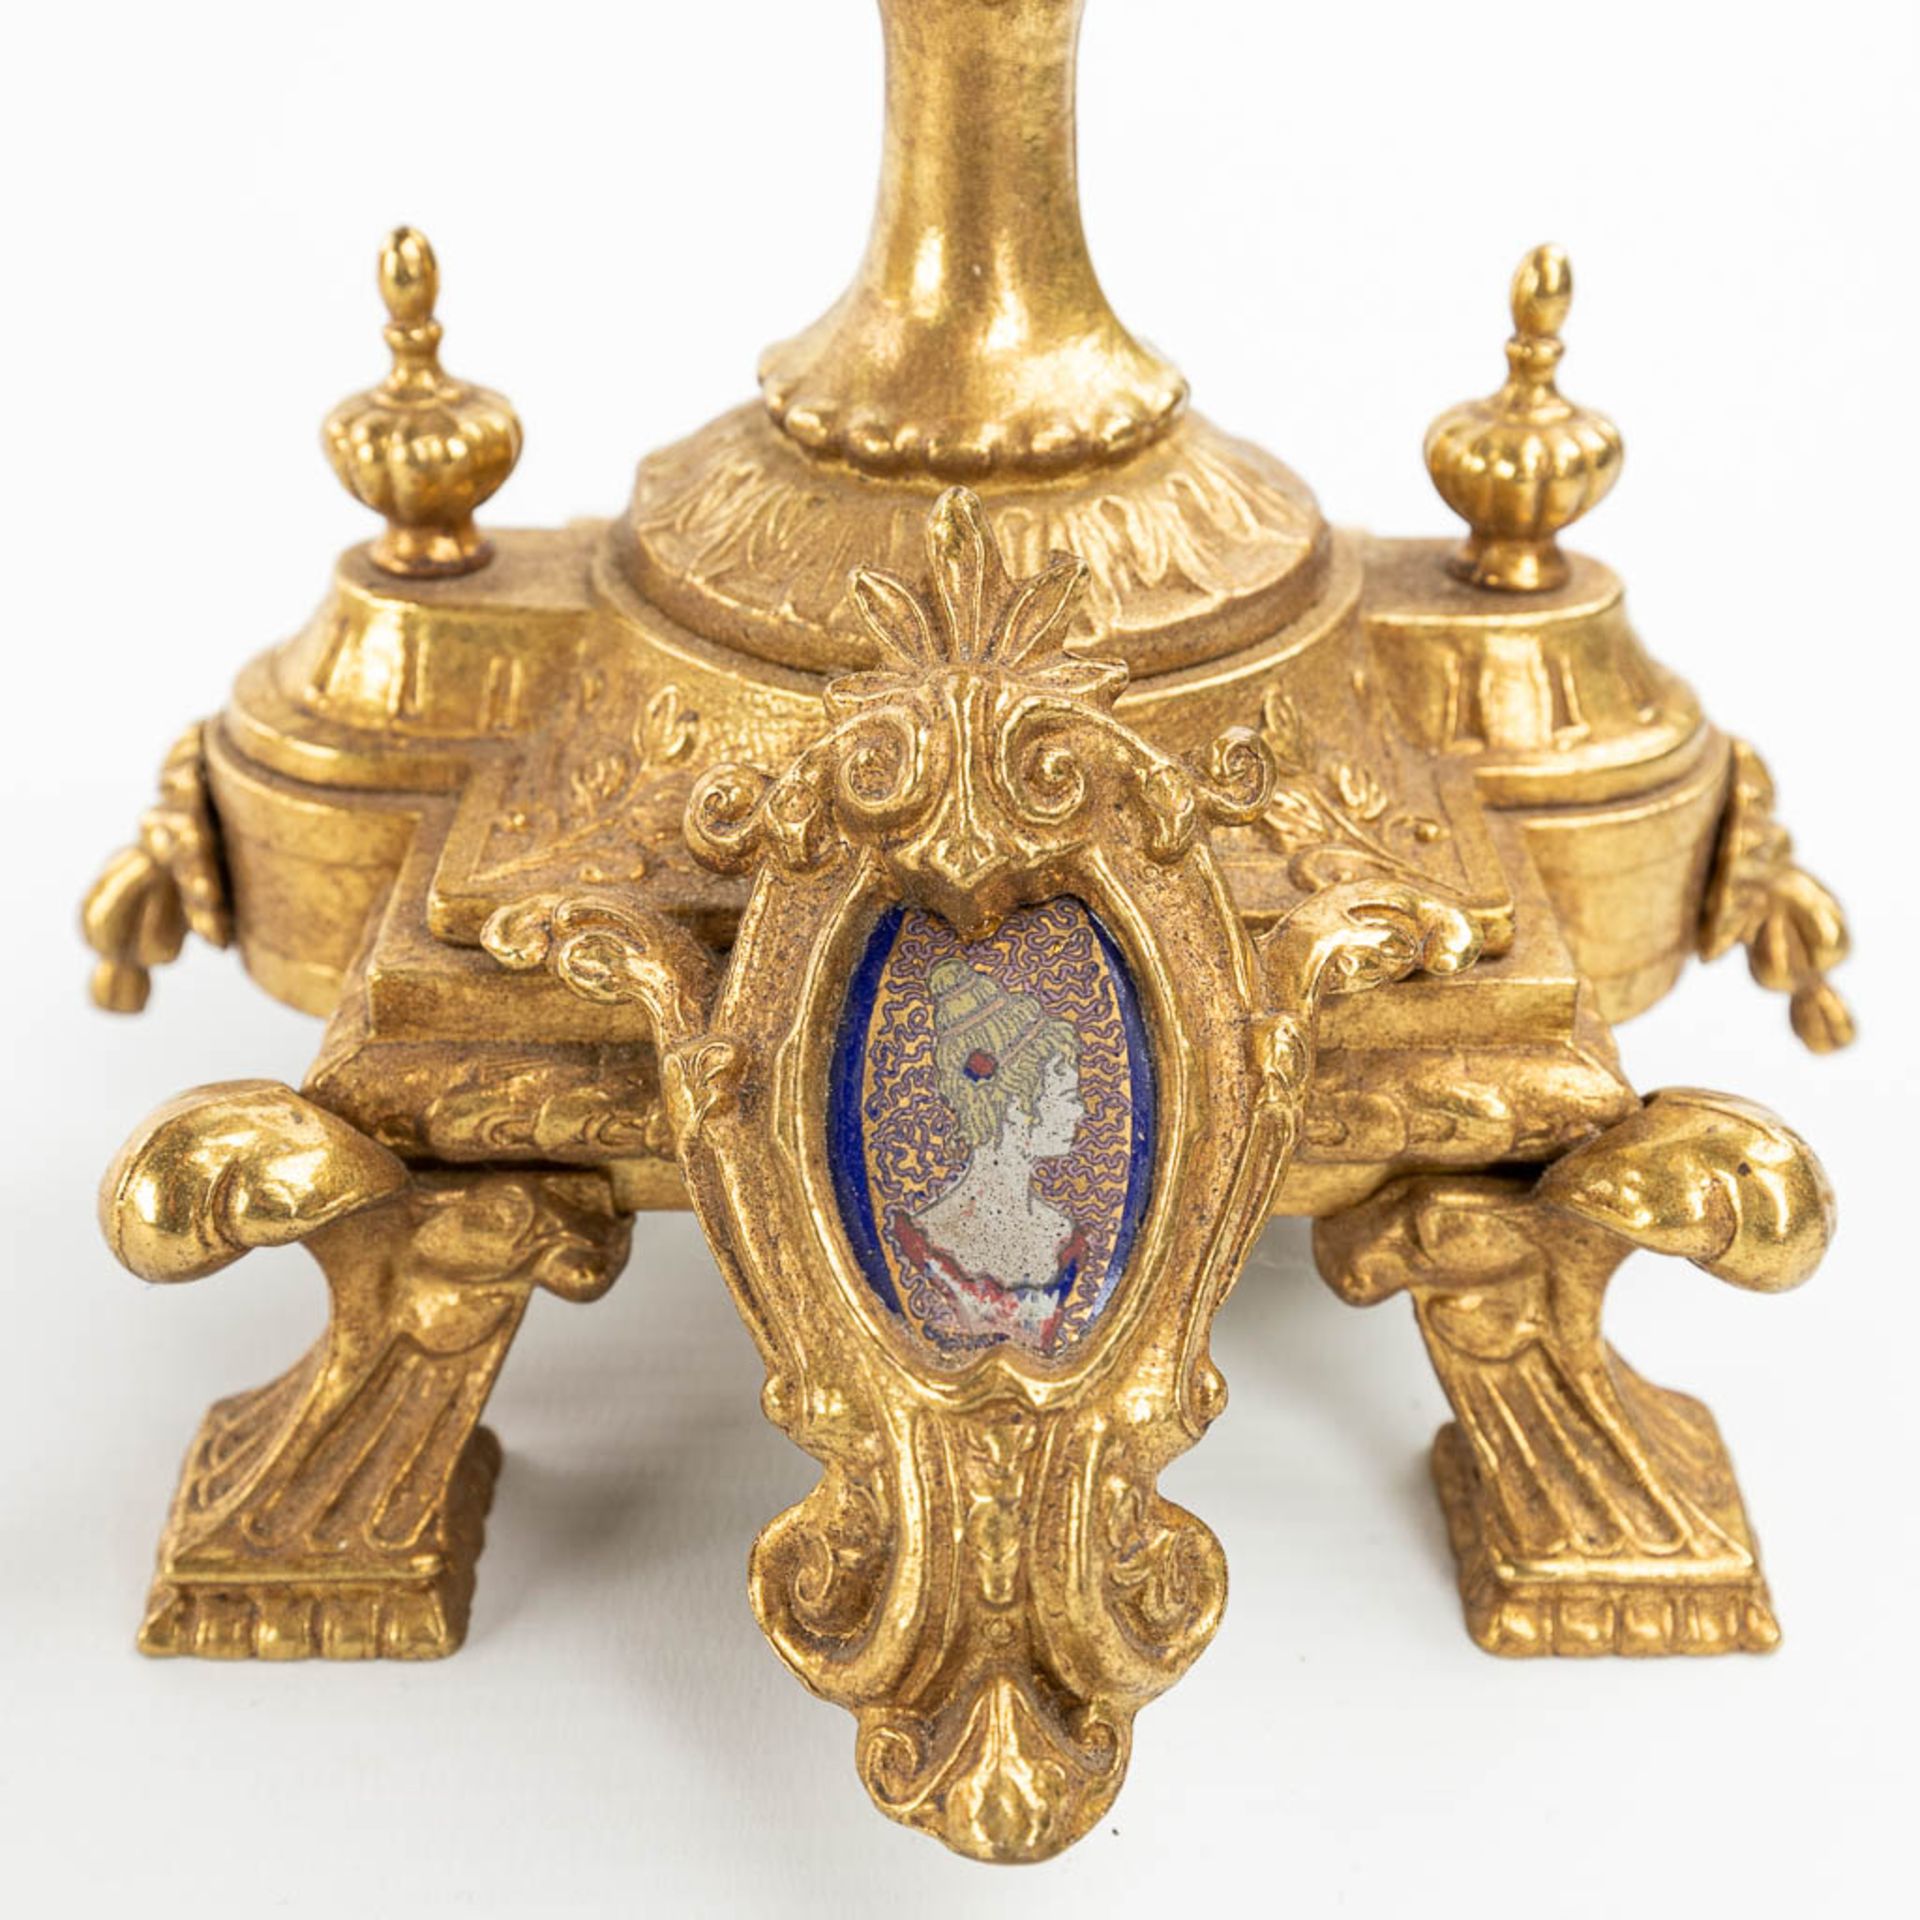 A three-piece mantle garniture clock made of bronze and porcelain and marked Imperial. (H:43cm) - Image 11 of 12